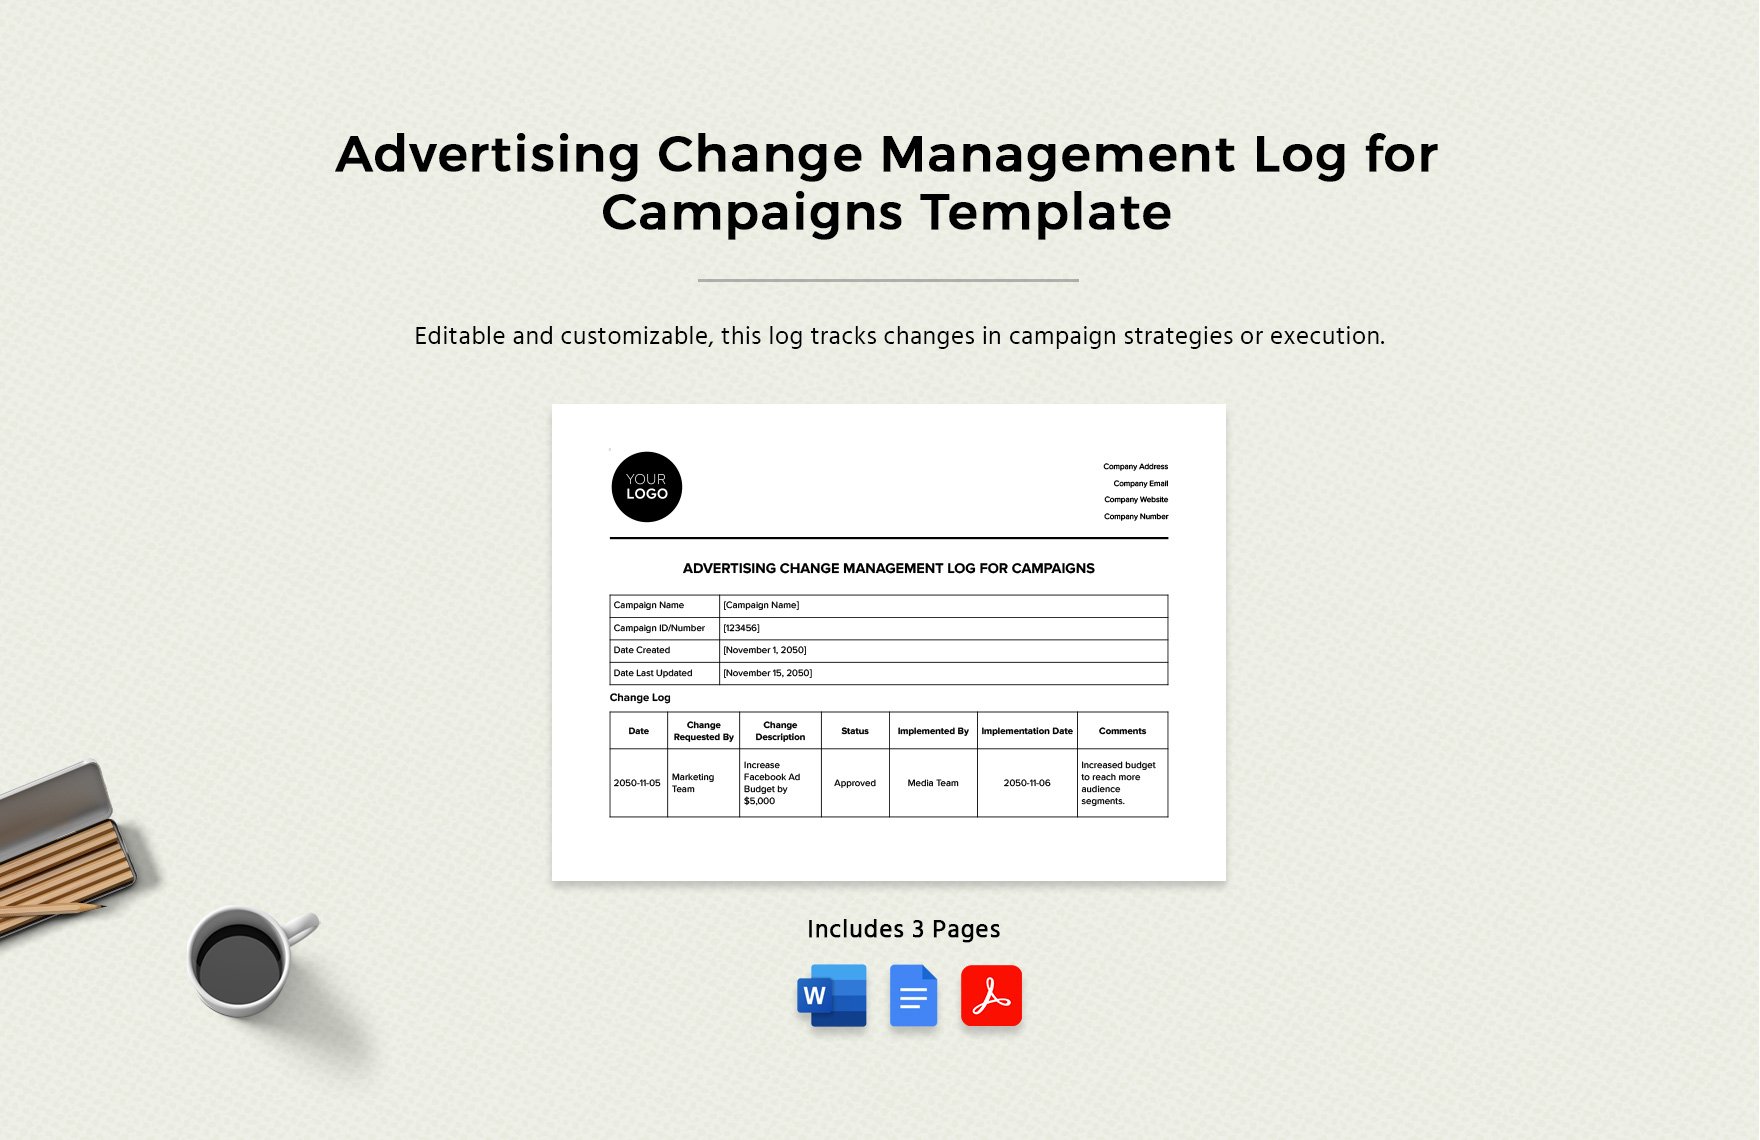 Advertising Change Management Log for Campaigns Template